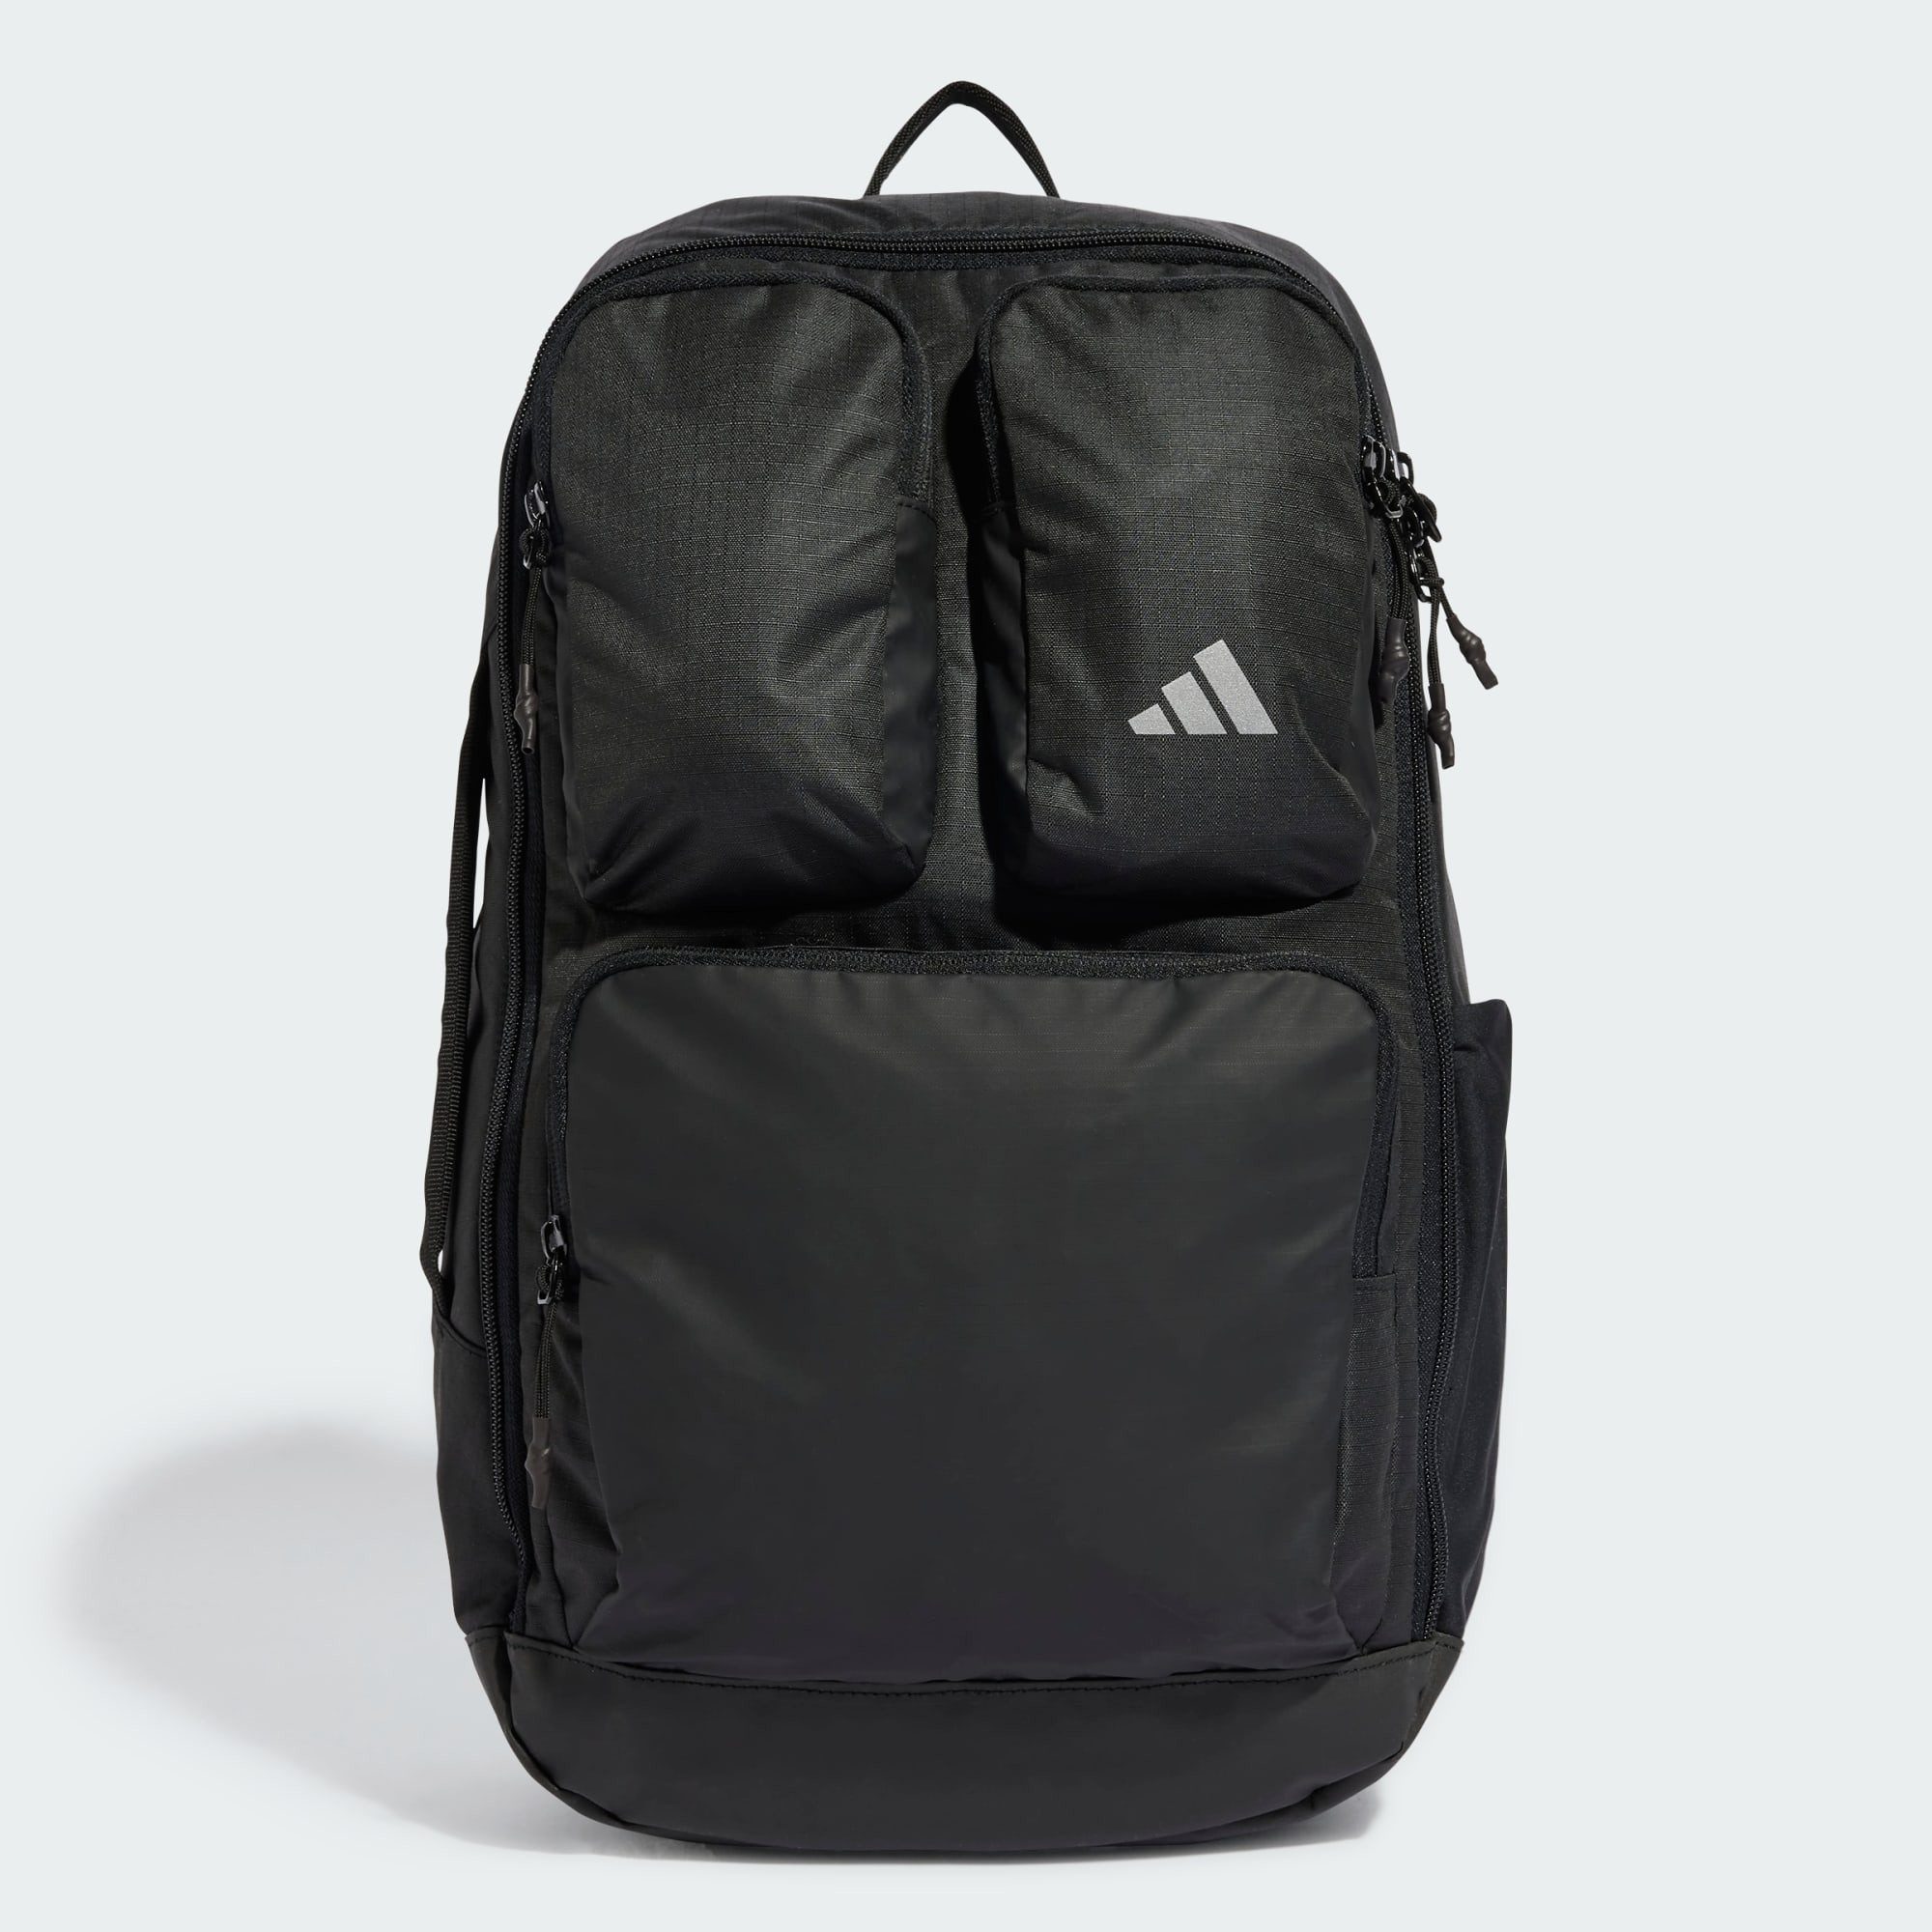 adidas Performance Sportrucksack IP/SYST. BACKPACK